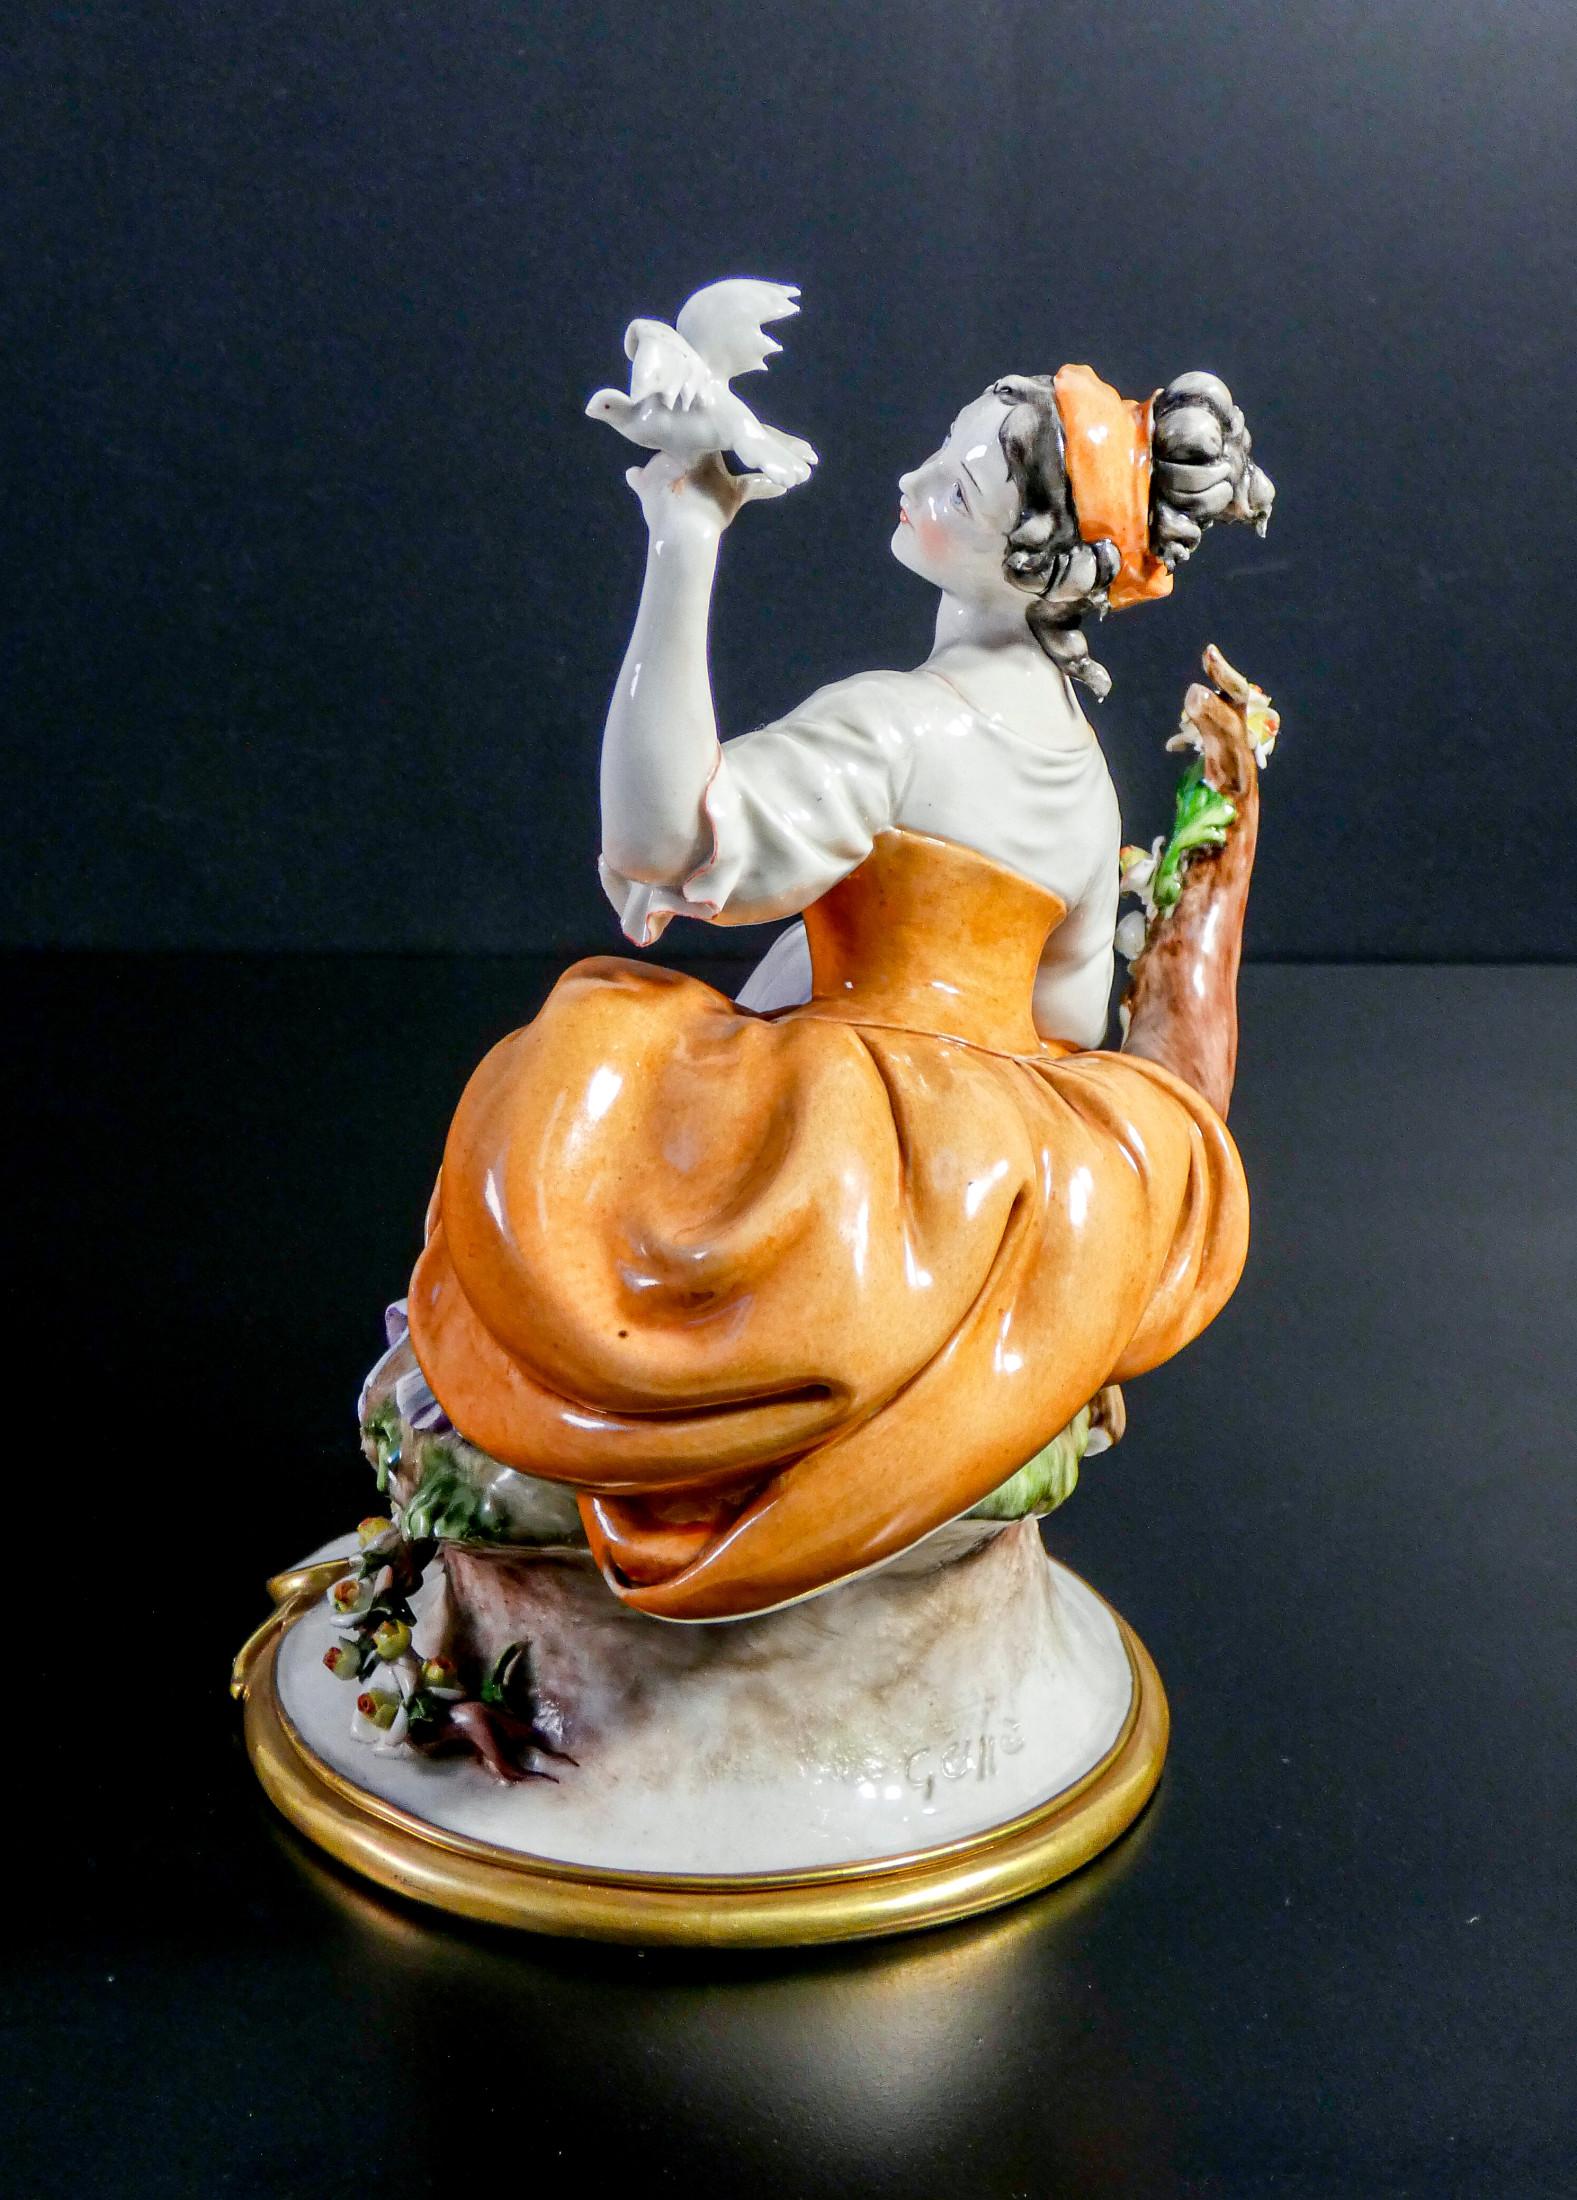 Pair of Hand Painted Porcelain Sculptures, Signed Giuseppe CAPPÉ, Contadini 1